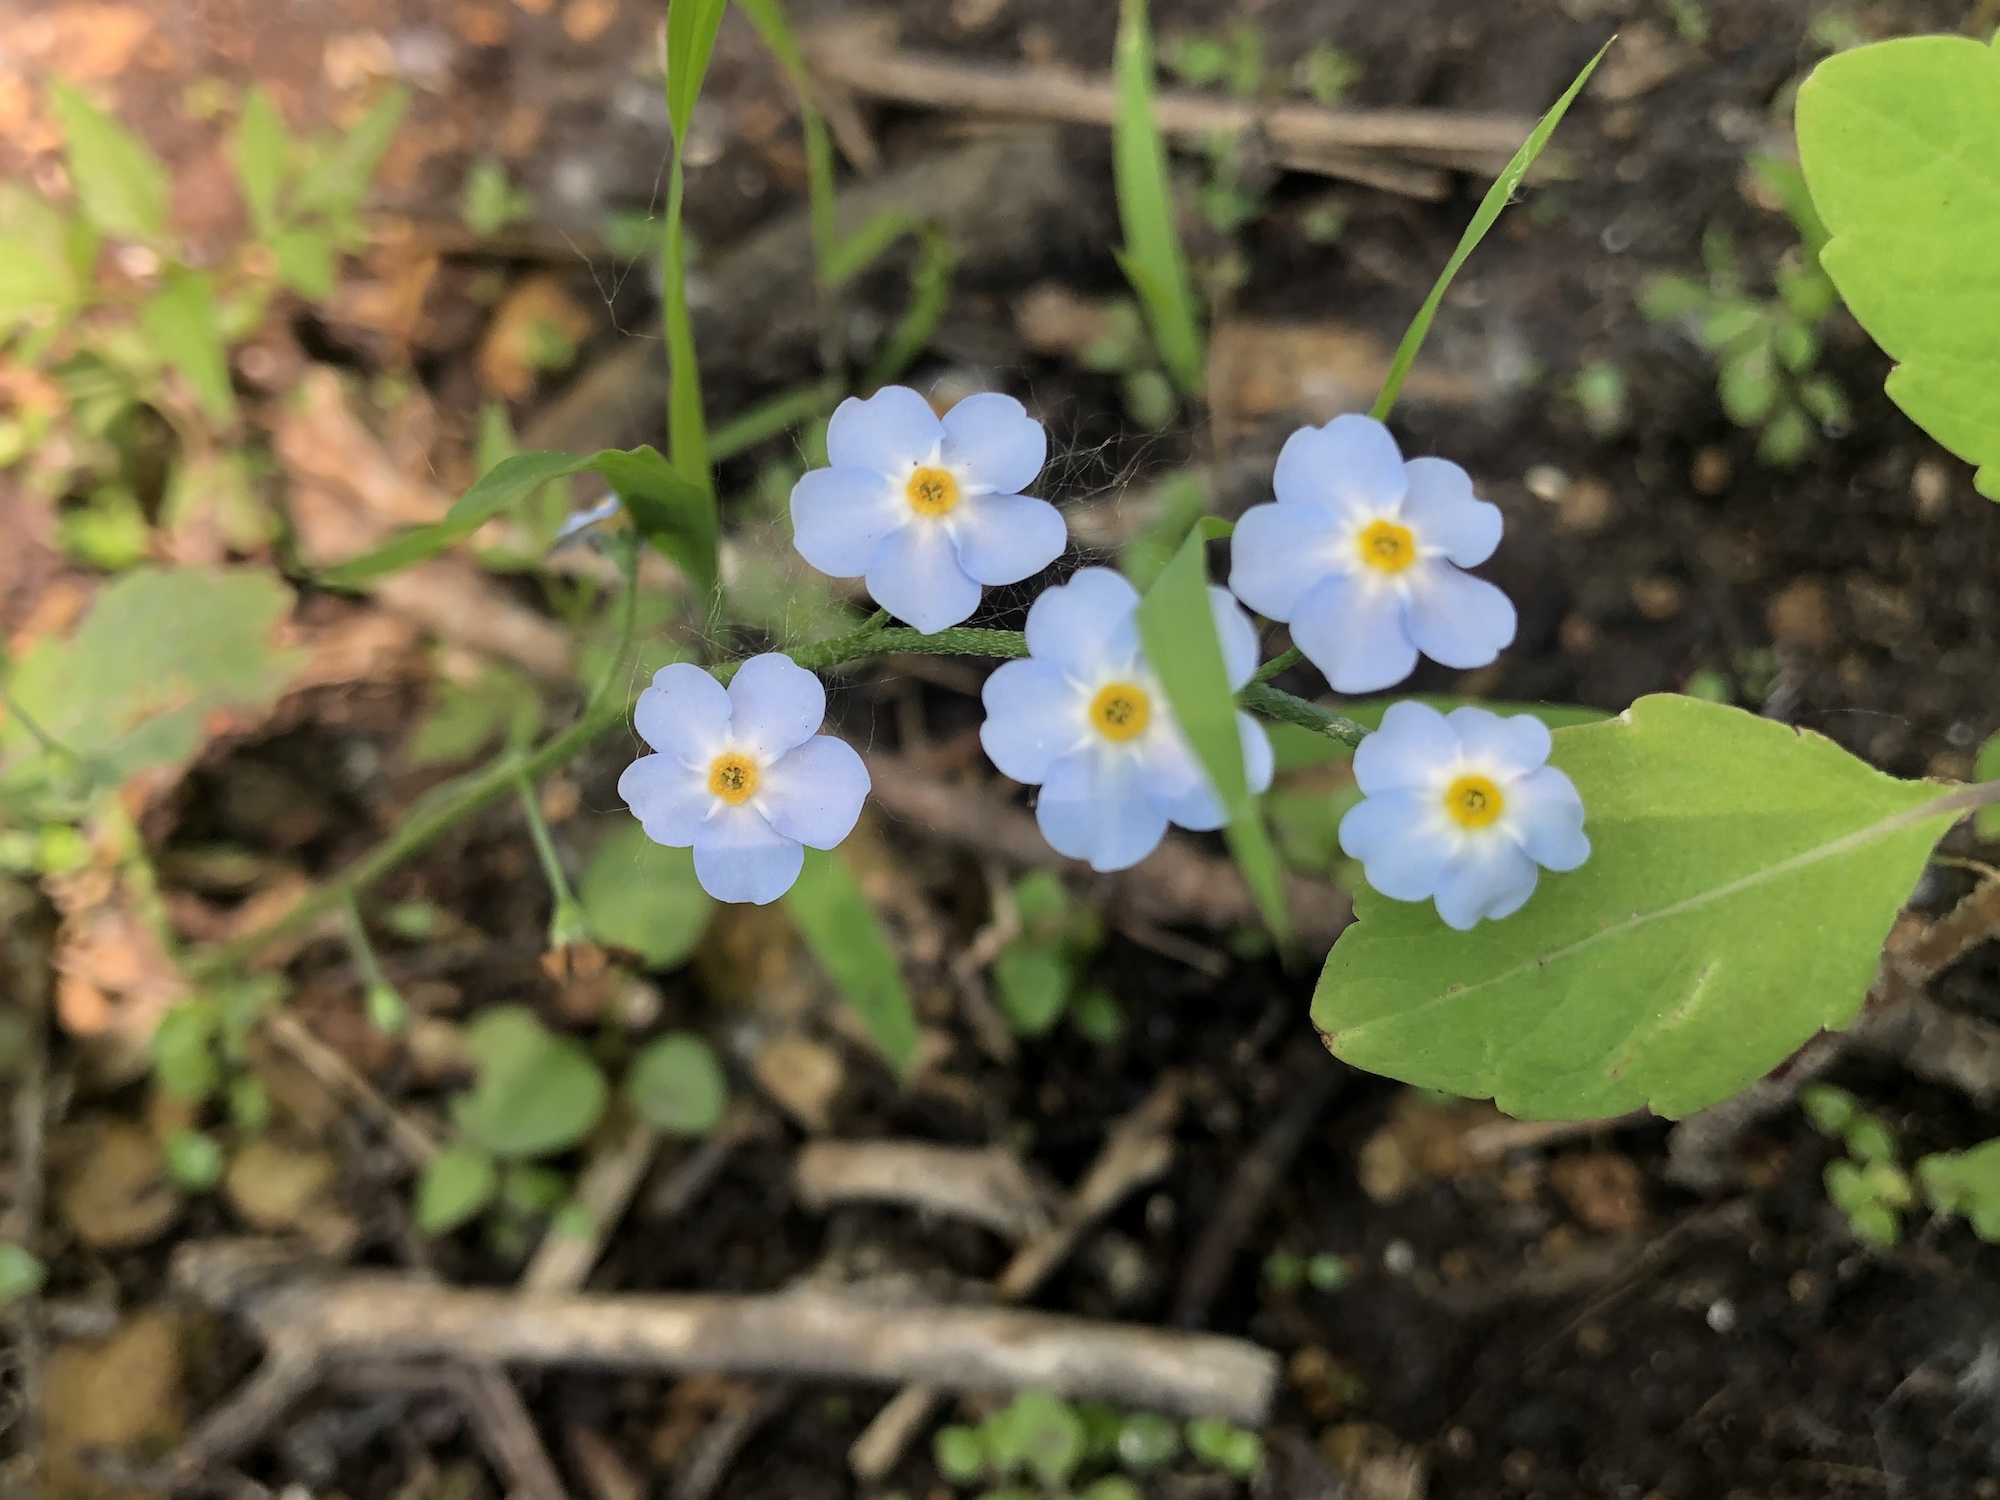 True Forget-me-not in Ho-Nee-Un Pond in Madison, Wisconsin on June 3, 2021.